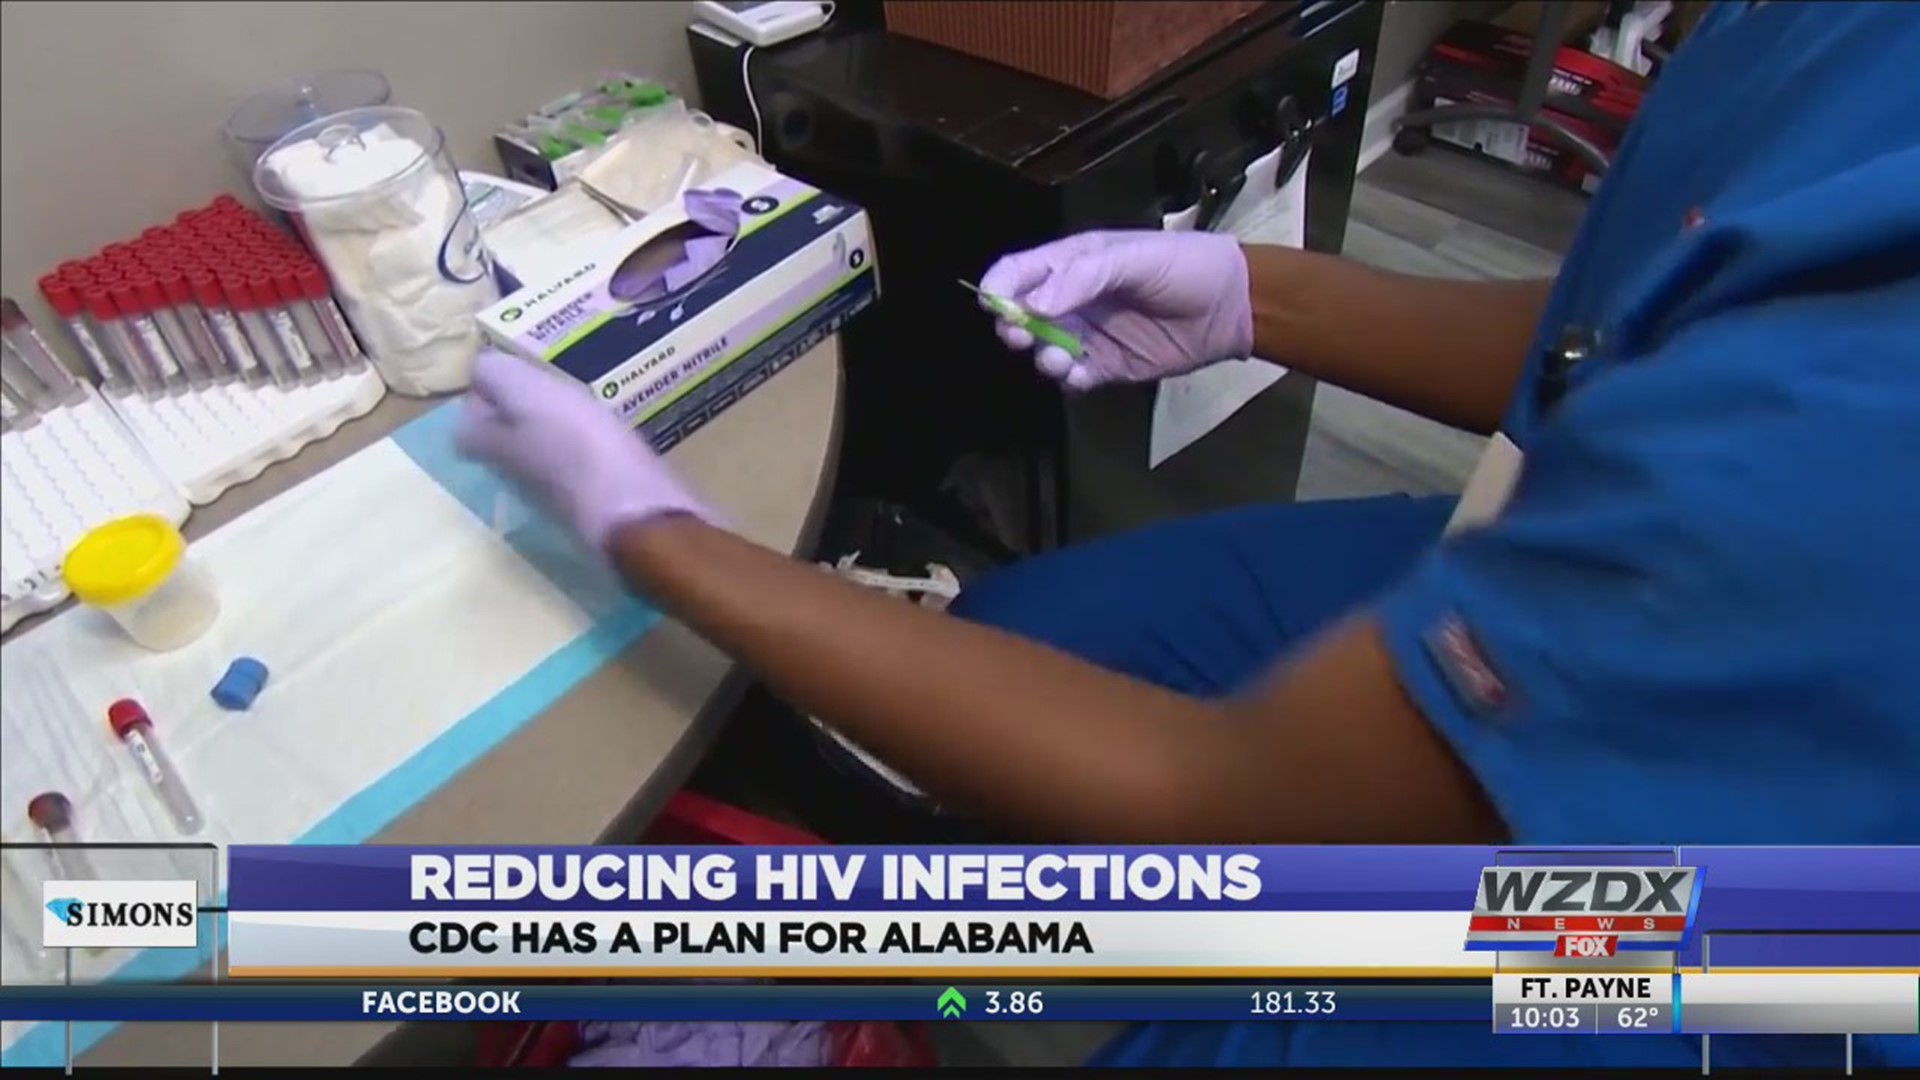 The Director of the CDC came to Montgomery to meet with state health officials and share the government's plans to end the HIV epidemic.